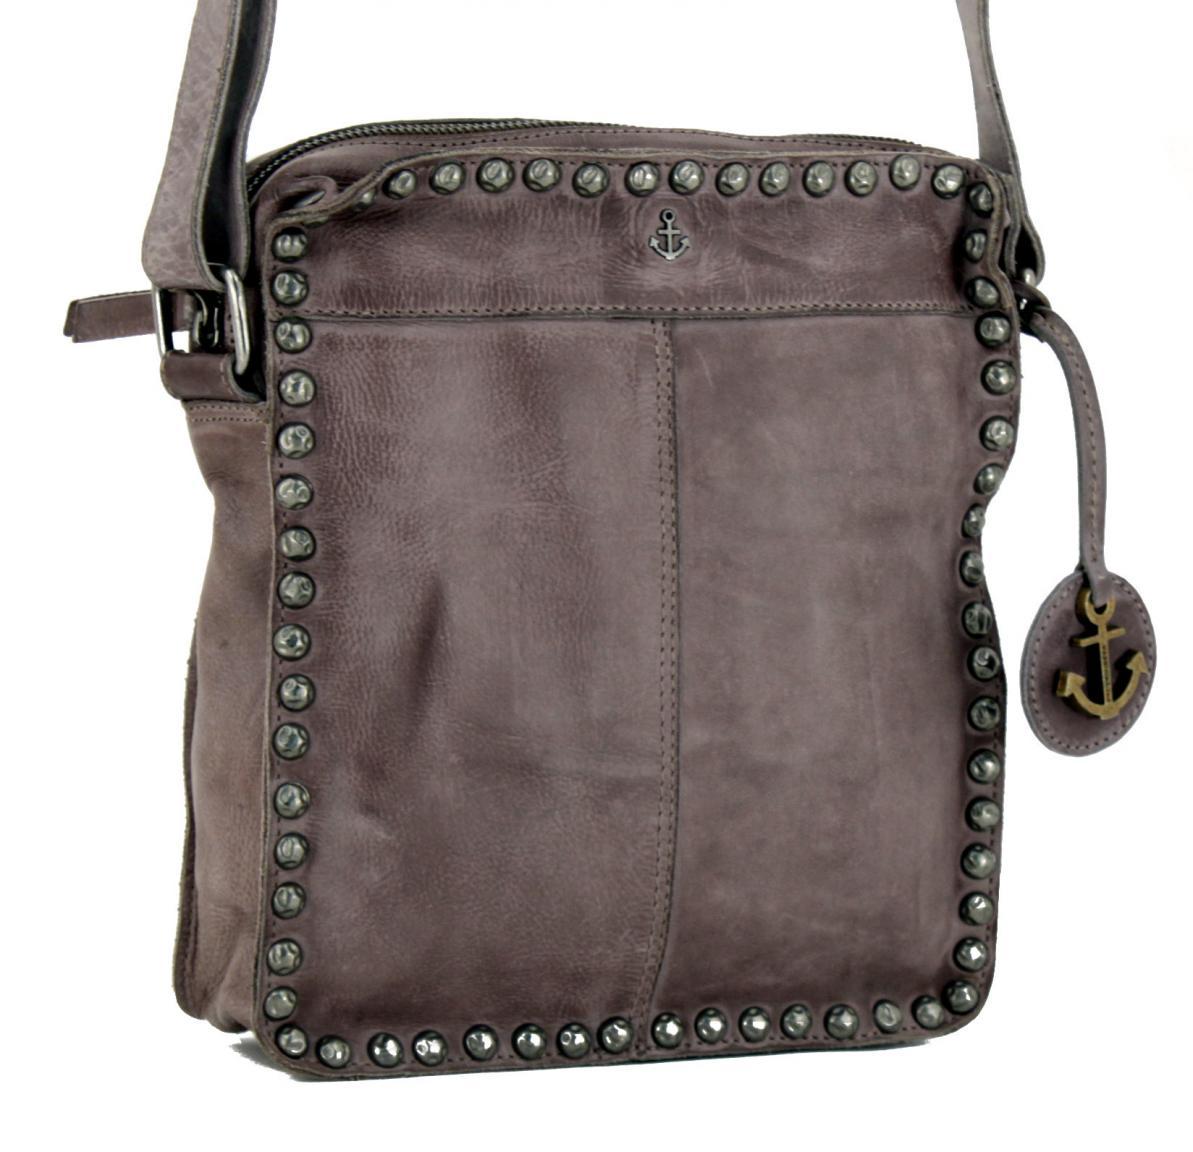 Crossovertasche Harbour 2nd Siw Plain and Studs Grey graubraun